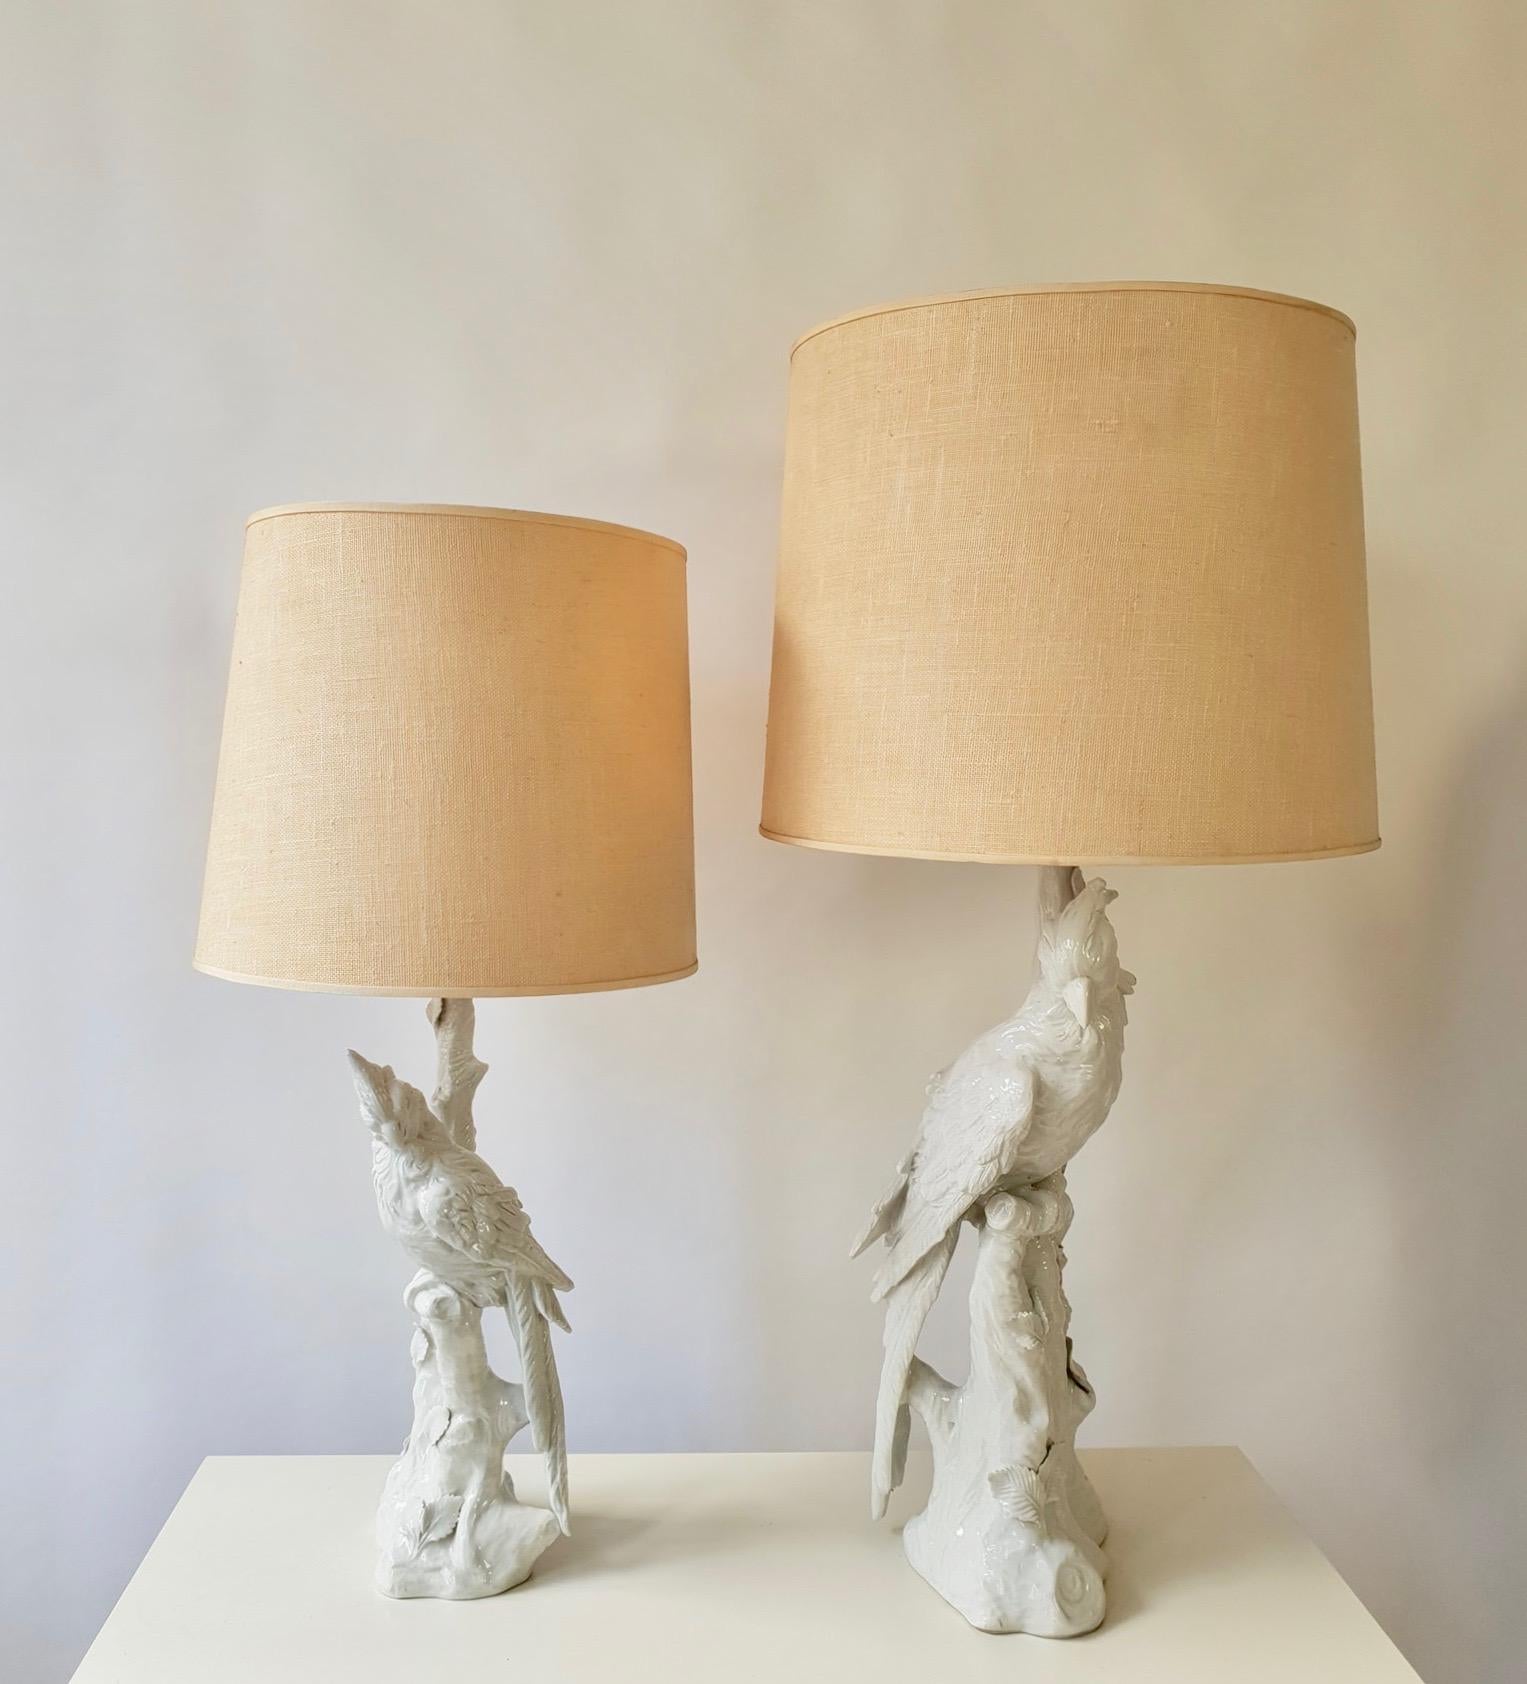 Two table lamps representing white parrots standing on a tree stump.
Height with shade 83 cm and 98 cm.
Diameter shades 40 cm and 50 cm.
Height base 52 cm and 65 cm.